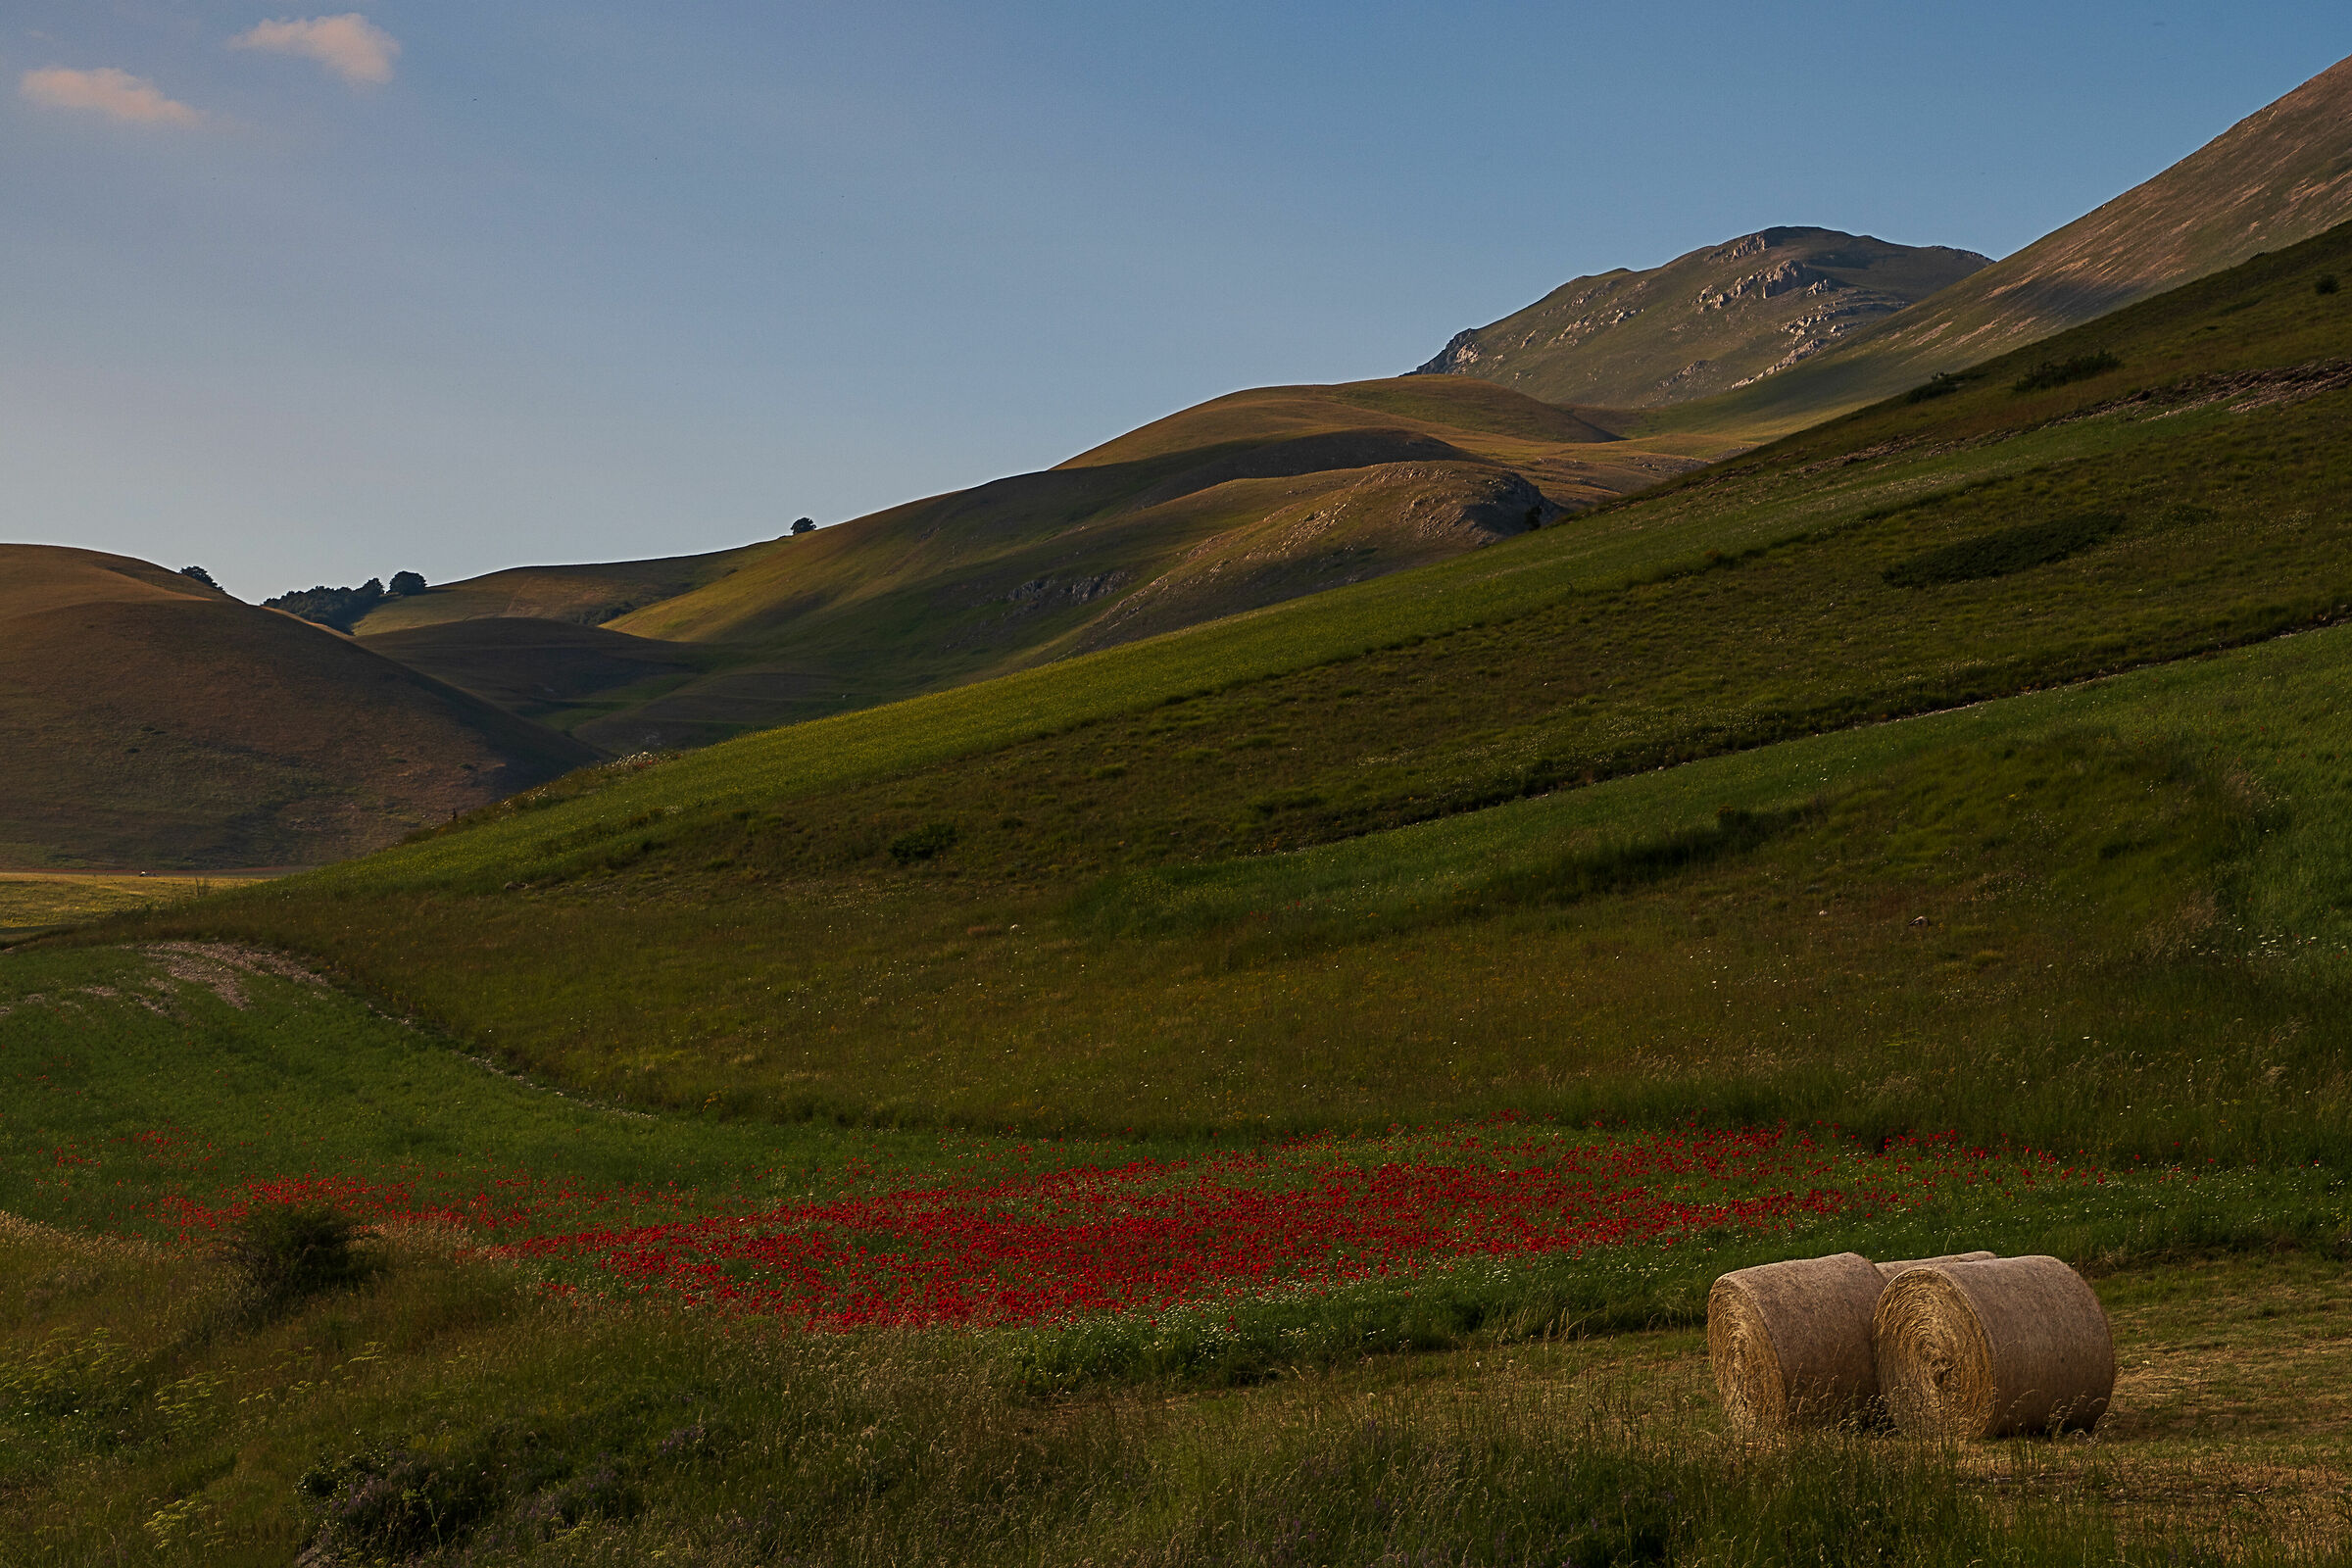 Poppies and bales...